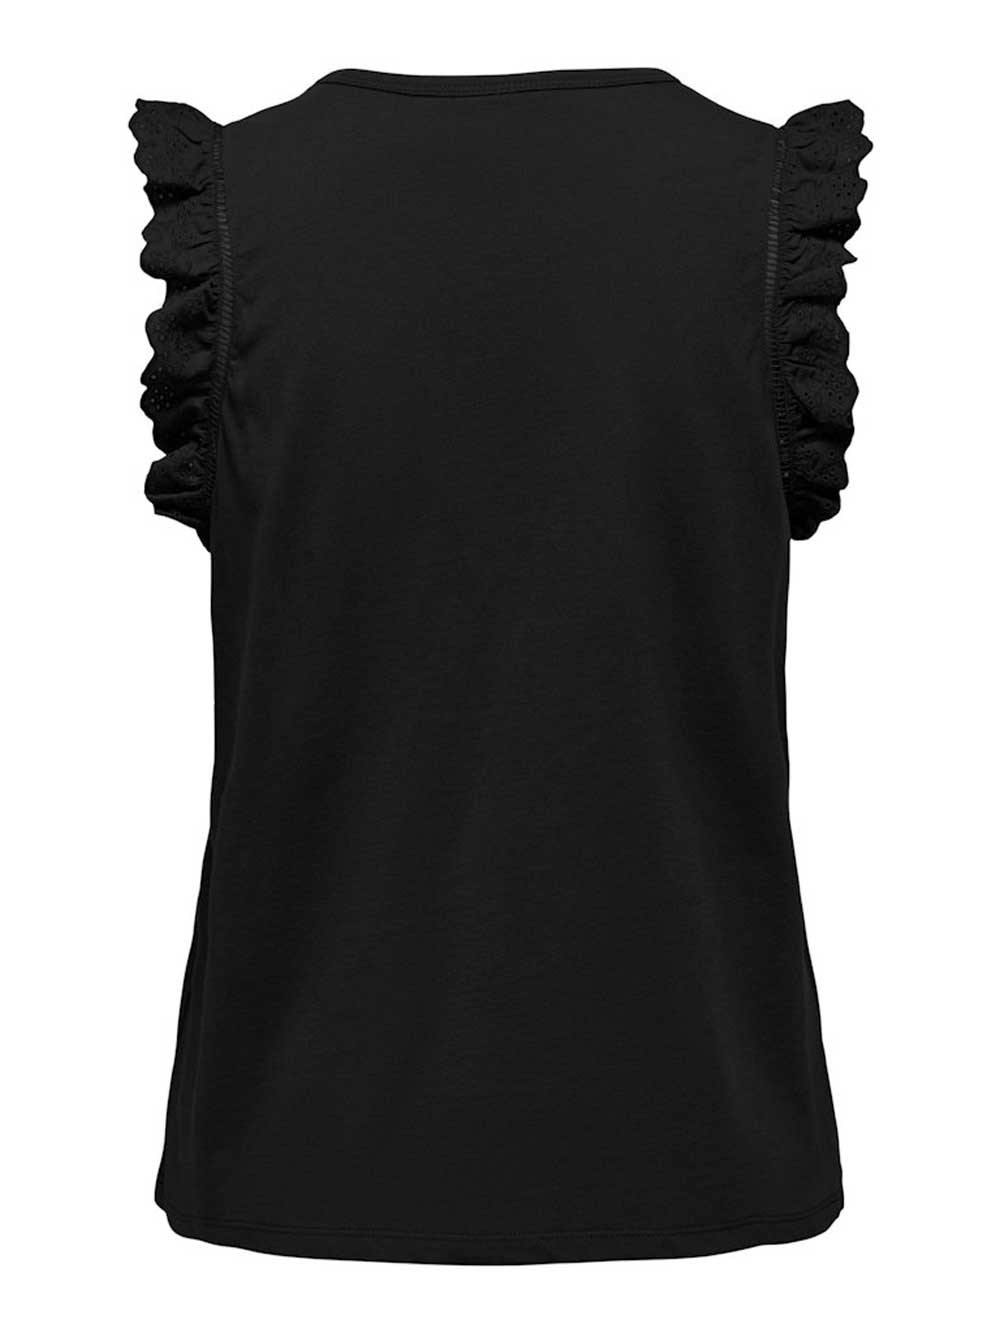 ONLY T-shirts e Tops ONLY da DONNA - Black